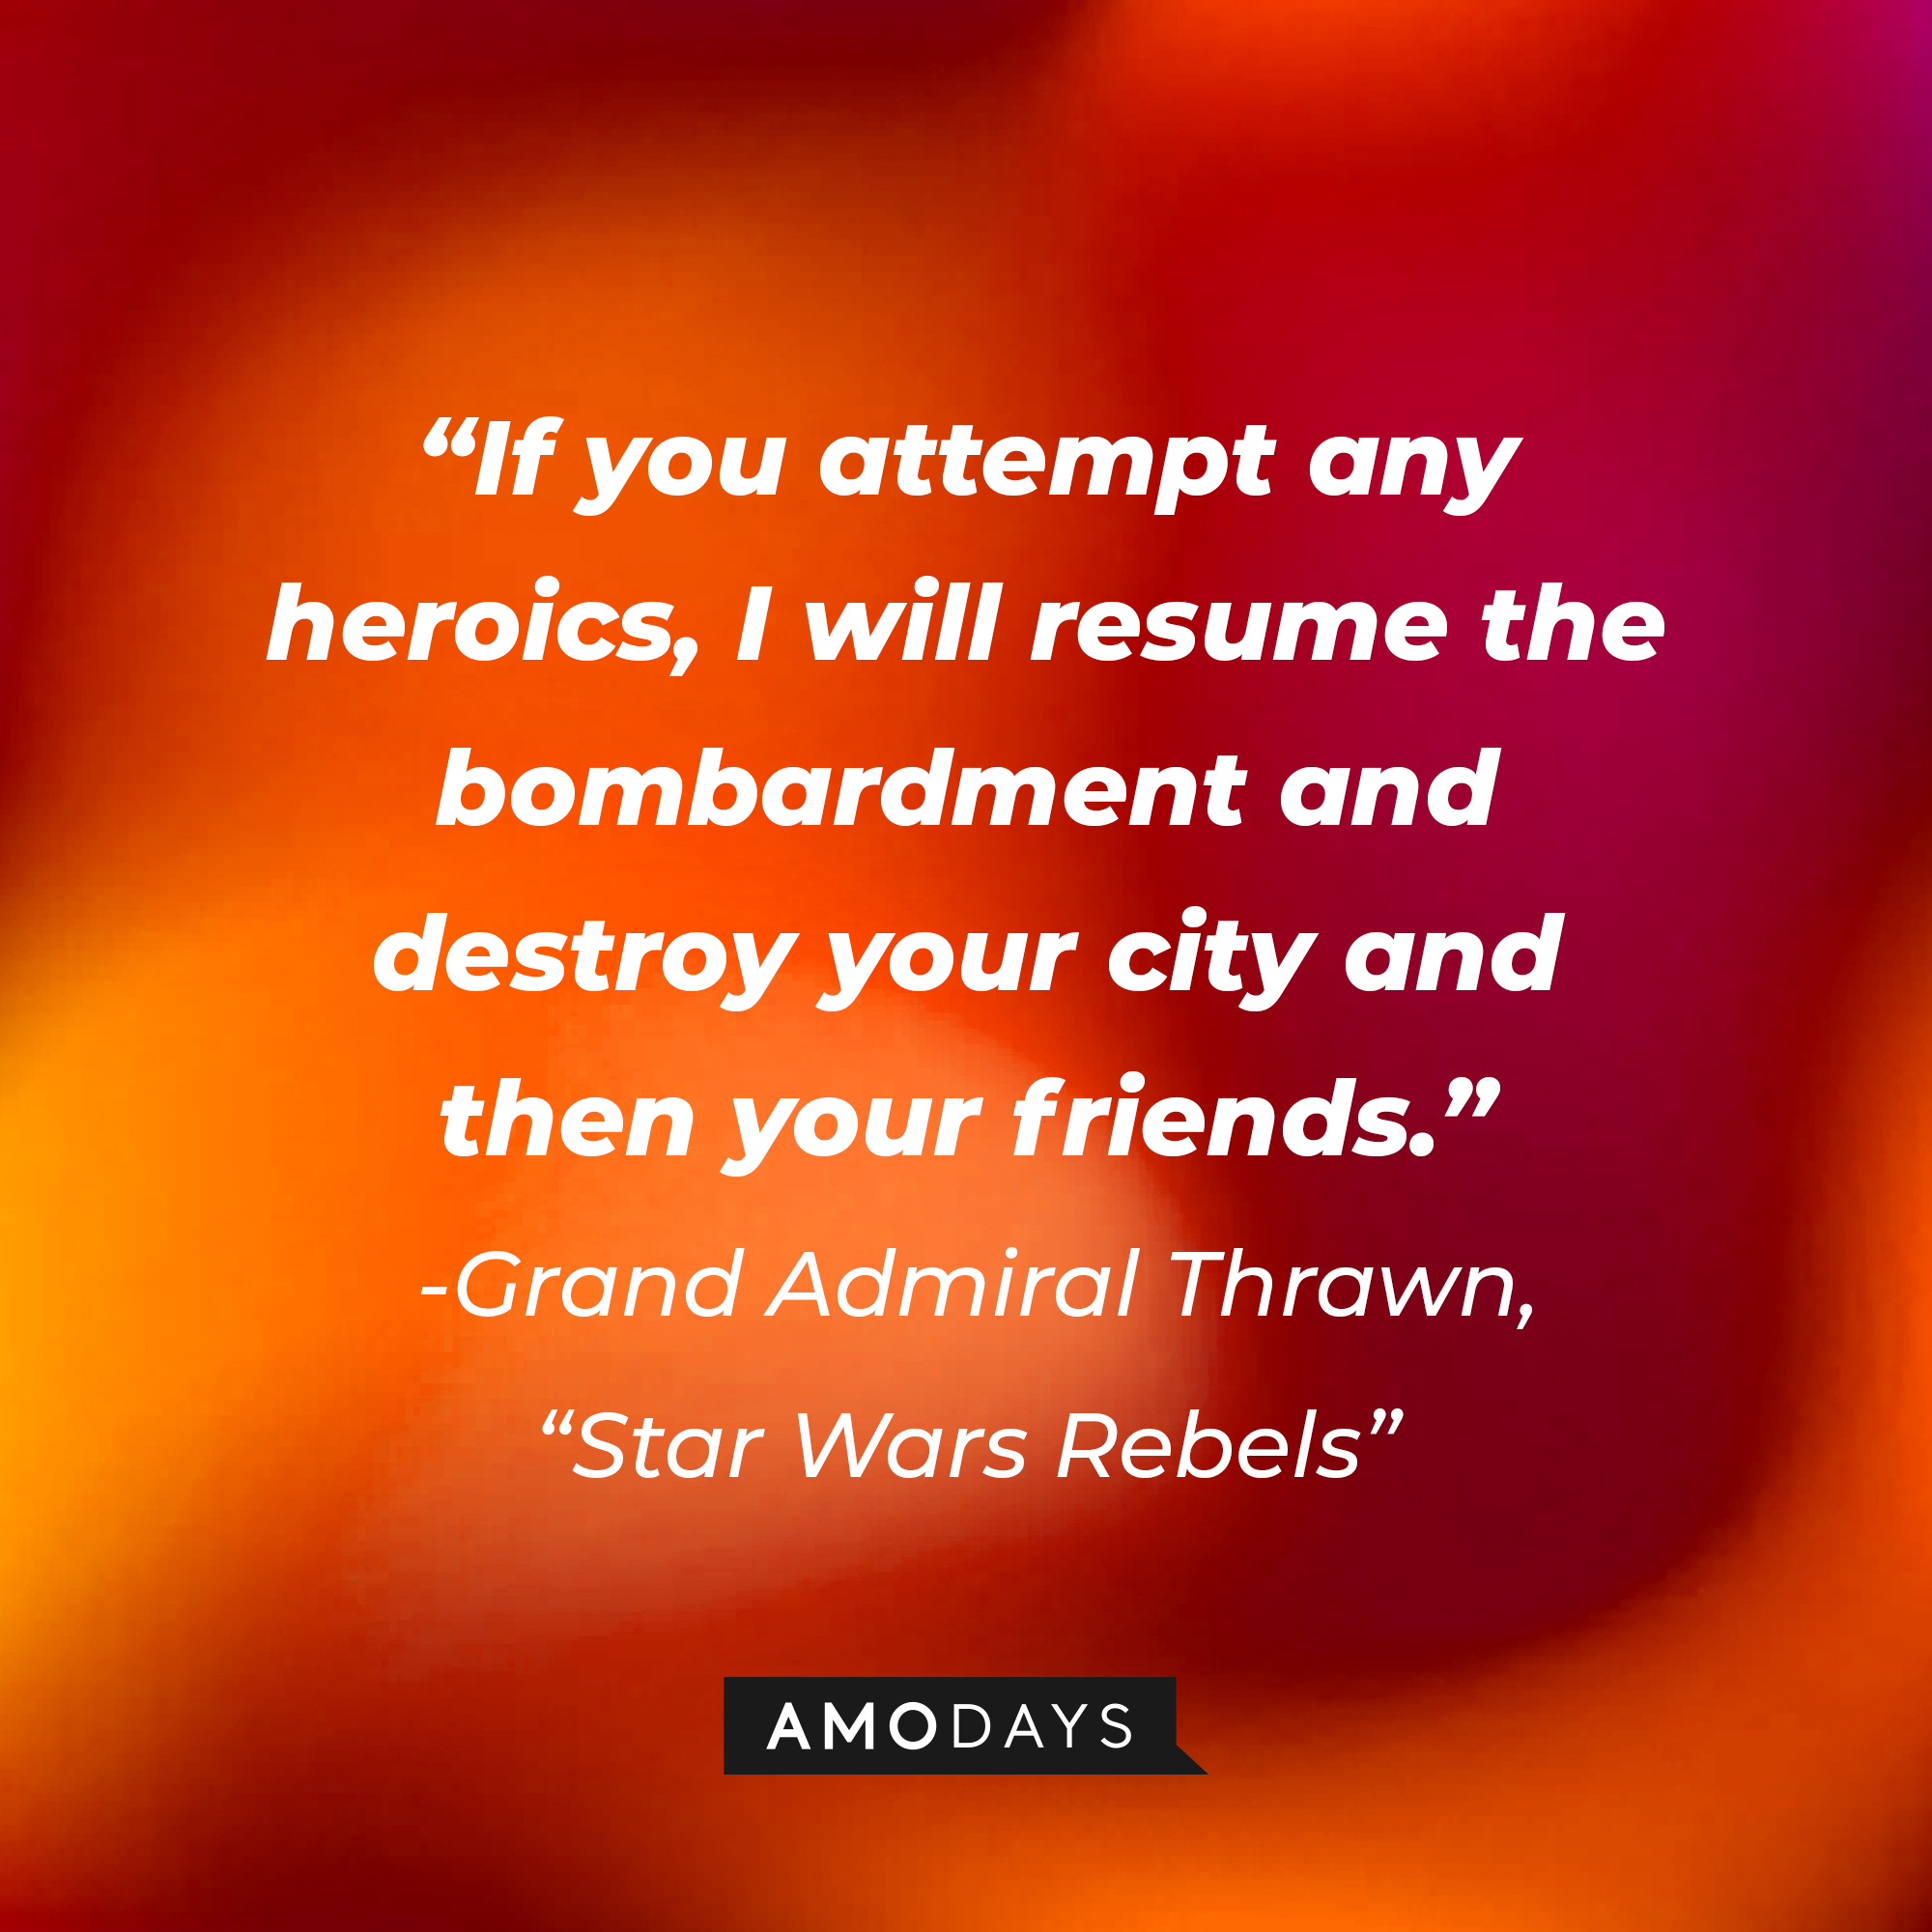 Grand Admiral Thrawn's quote: "If you attempt any heroics, I will resume the bombardment and destroy your city and then your friends." | Source: AmoDays